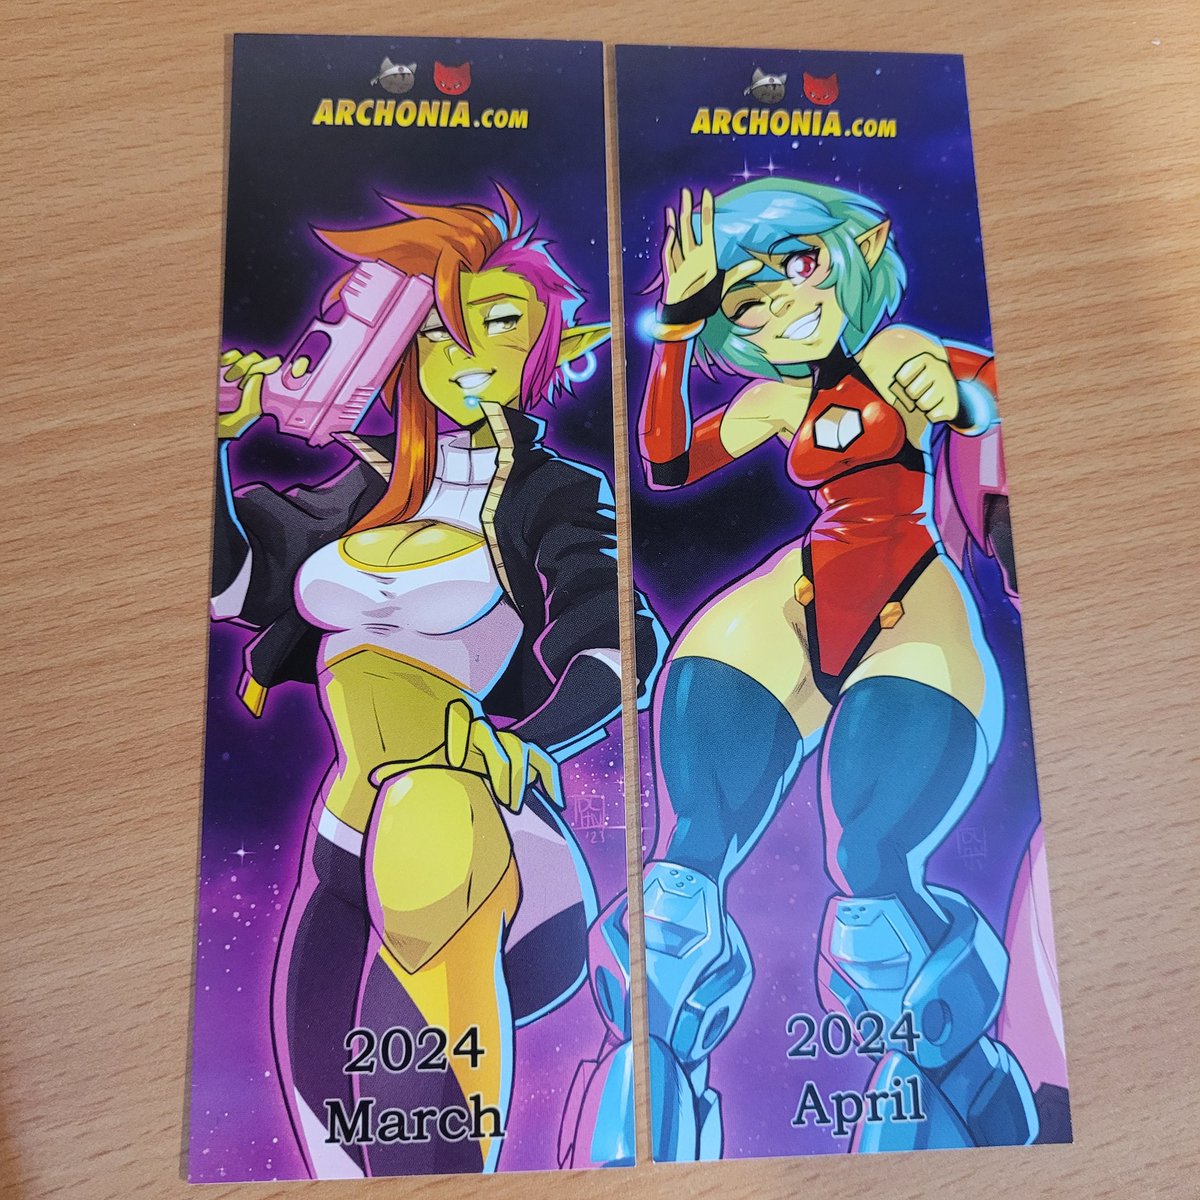 The April bookmark for @Archonia is in, featuring Nalani this month! Part 2 of a 3 bookmark set :D